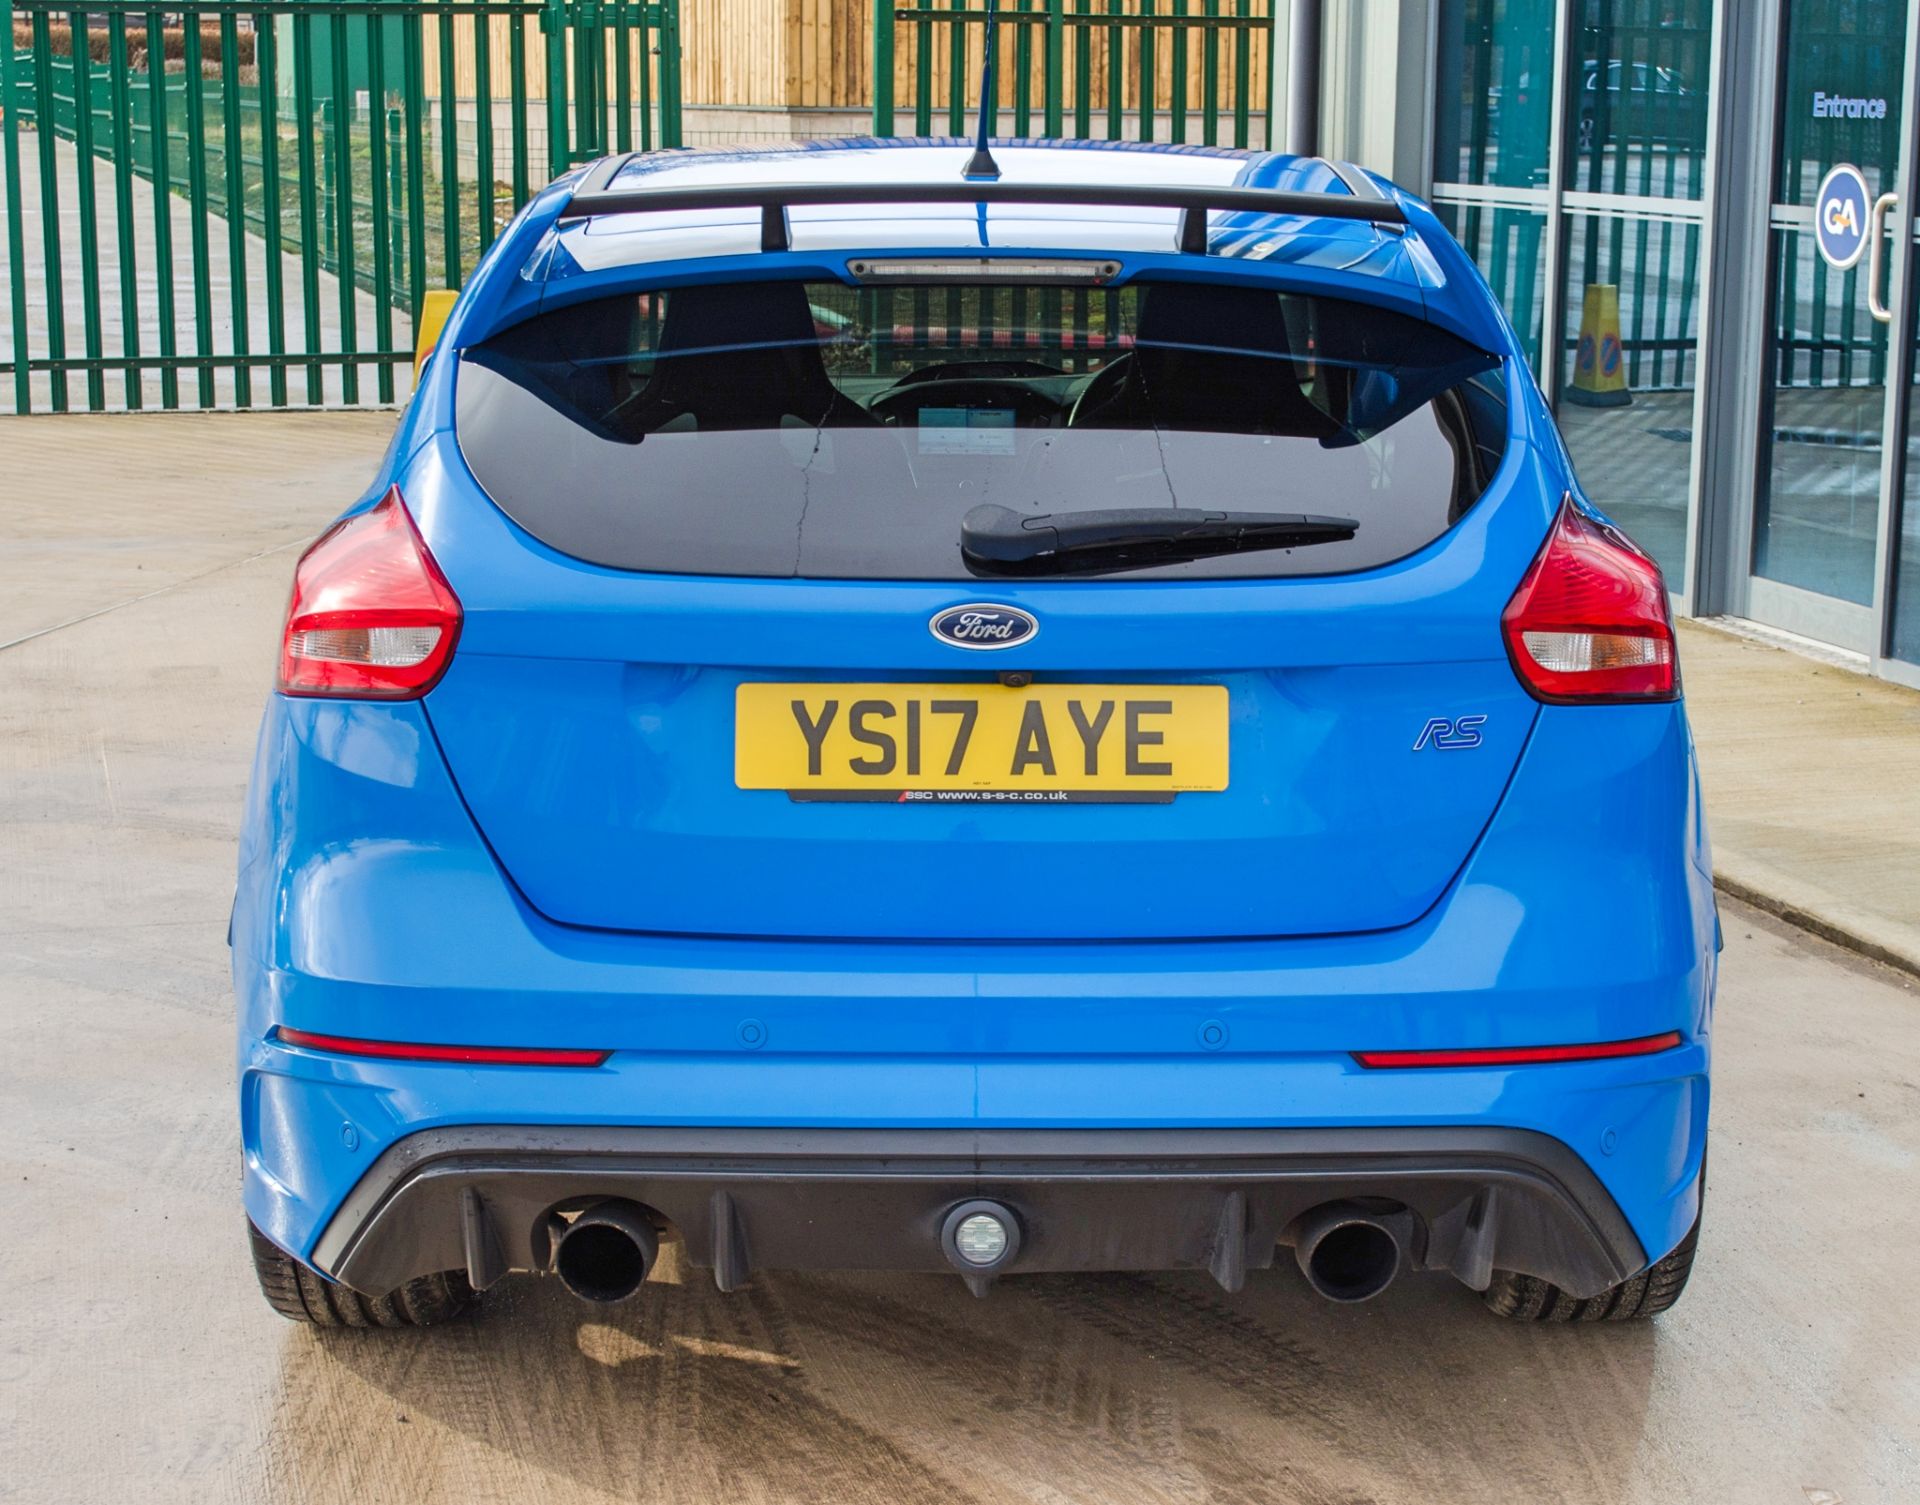 2017 Ford Focus 2.3 RS 5 door hatch back - Image 12 of 56